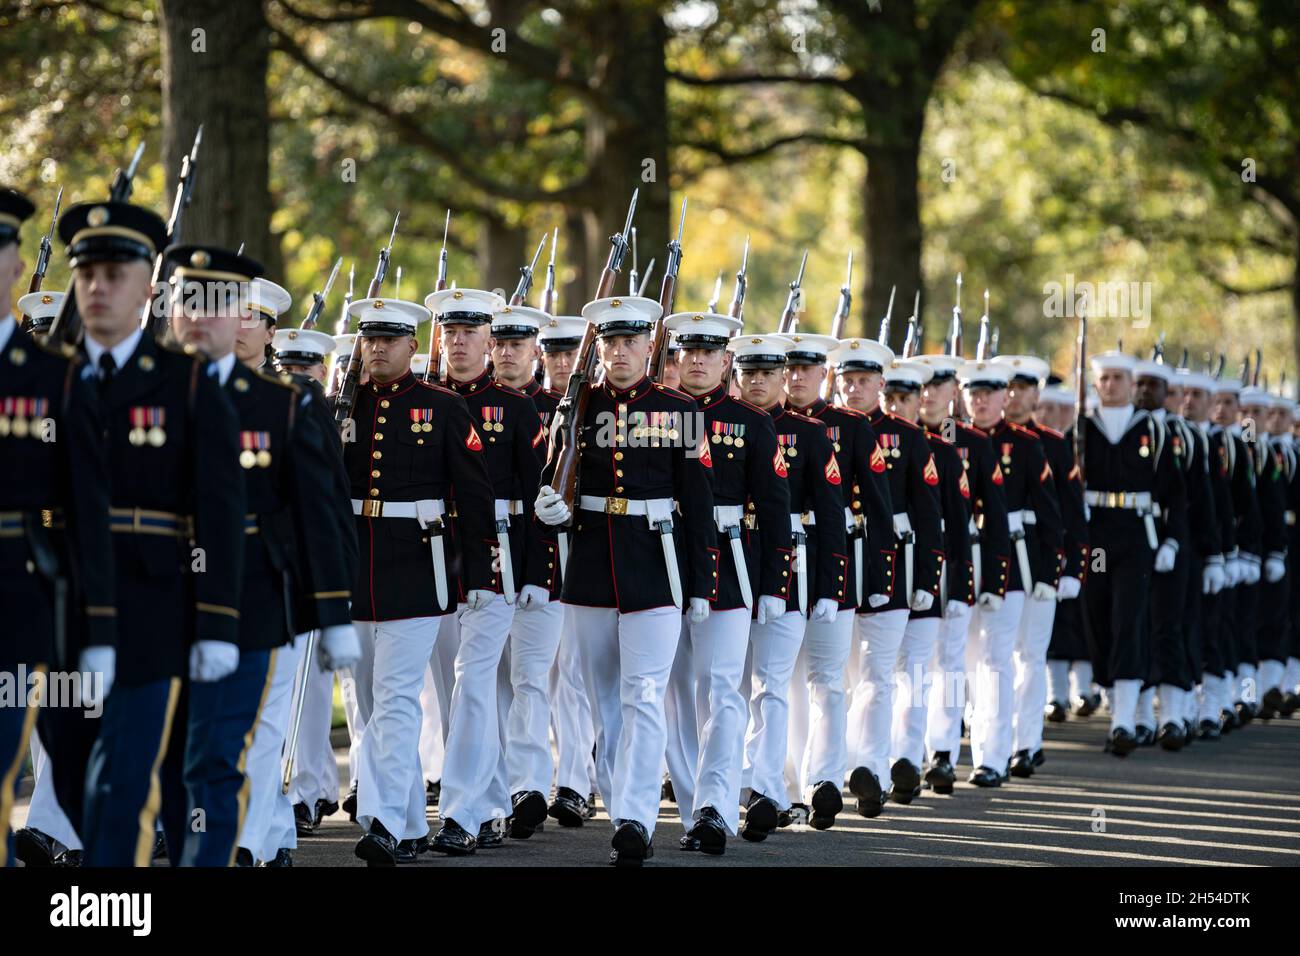 Arlington, United States. 05th Nov, 2021. U.S. Armed Forces Honor Guard, the 3d Army Infantry Regiment, Army Band and Old Guard Caisson Platoon march in a funeral procession behind the flag draped casket of former U.S. Secretary of State Gen. Colin Powell during the full honors funeral at Arlington National Cemetery, November 5, 2021 in Arlington, Virginia. Credit: Elizabeth Fraser/DOD Photo/Alamy Live News Stock Photo